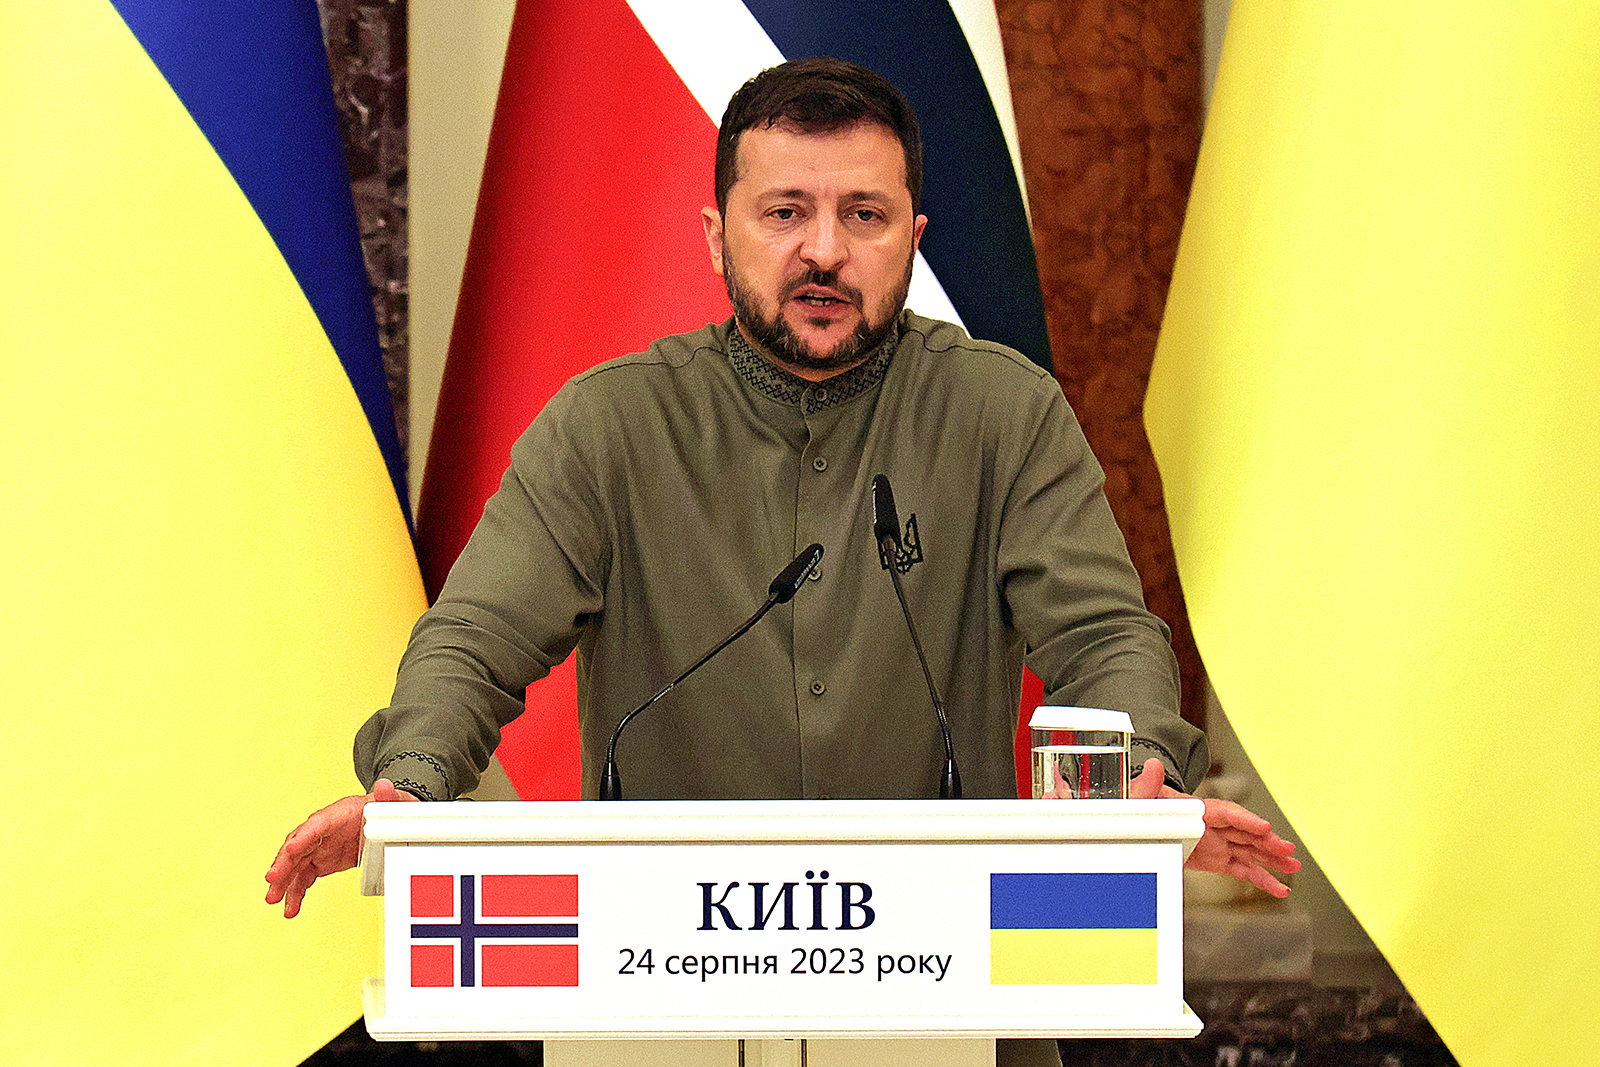 Volodymyr Zelenskyy speaks during a press conference in Kyiv, Ukraine on August 24.